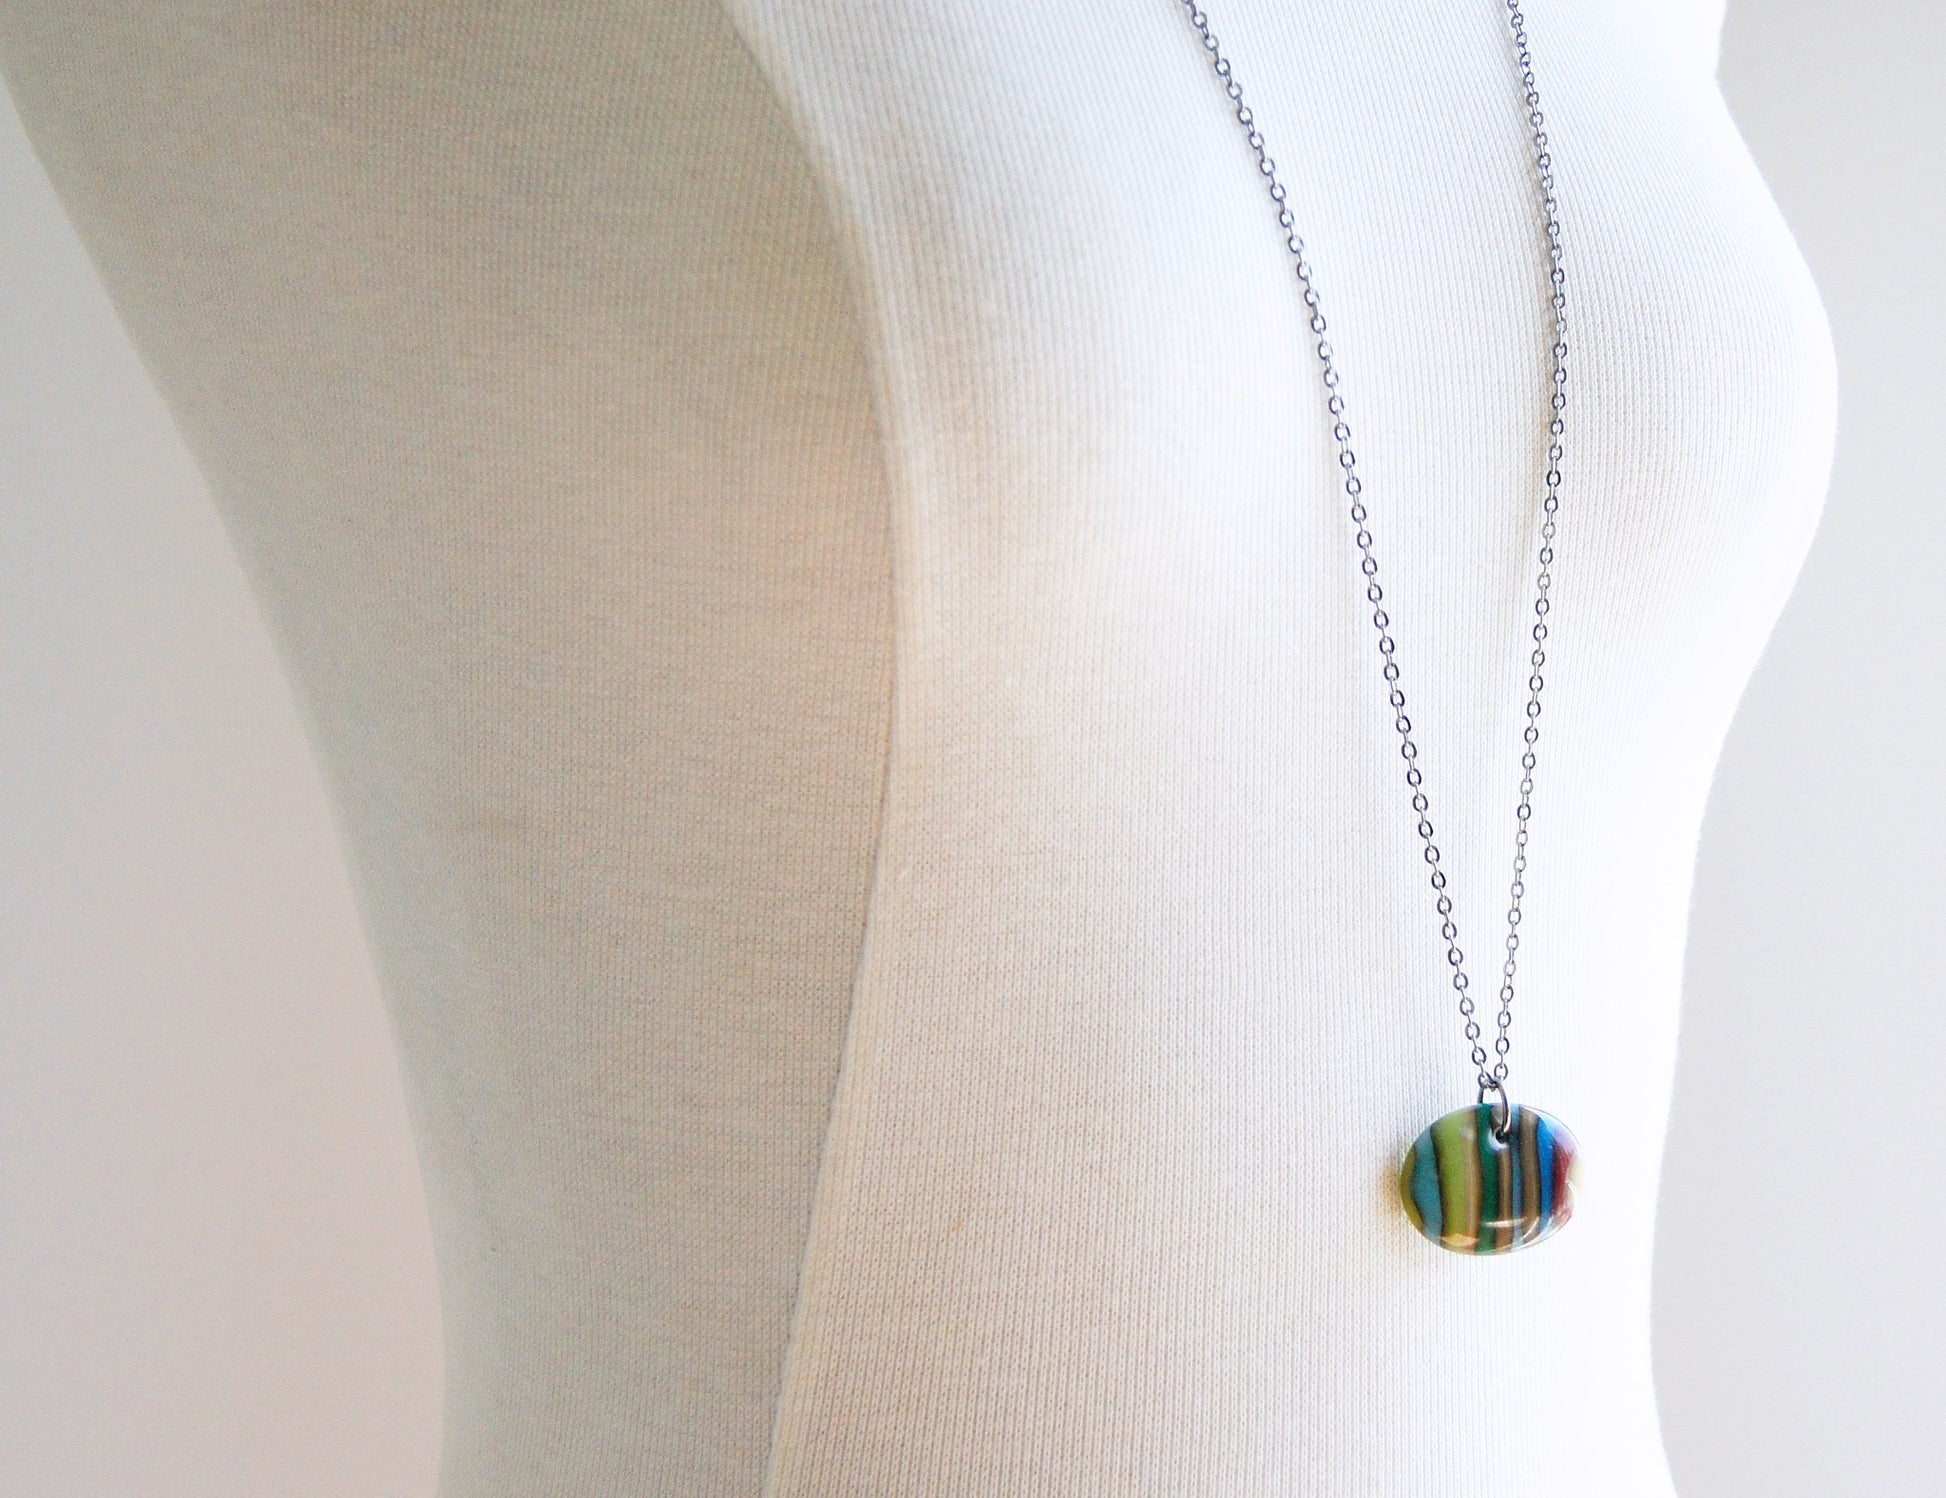 36" long pendant necklace handmade in glass